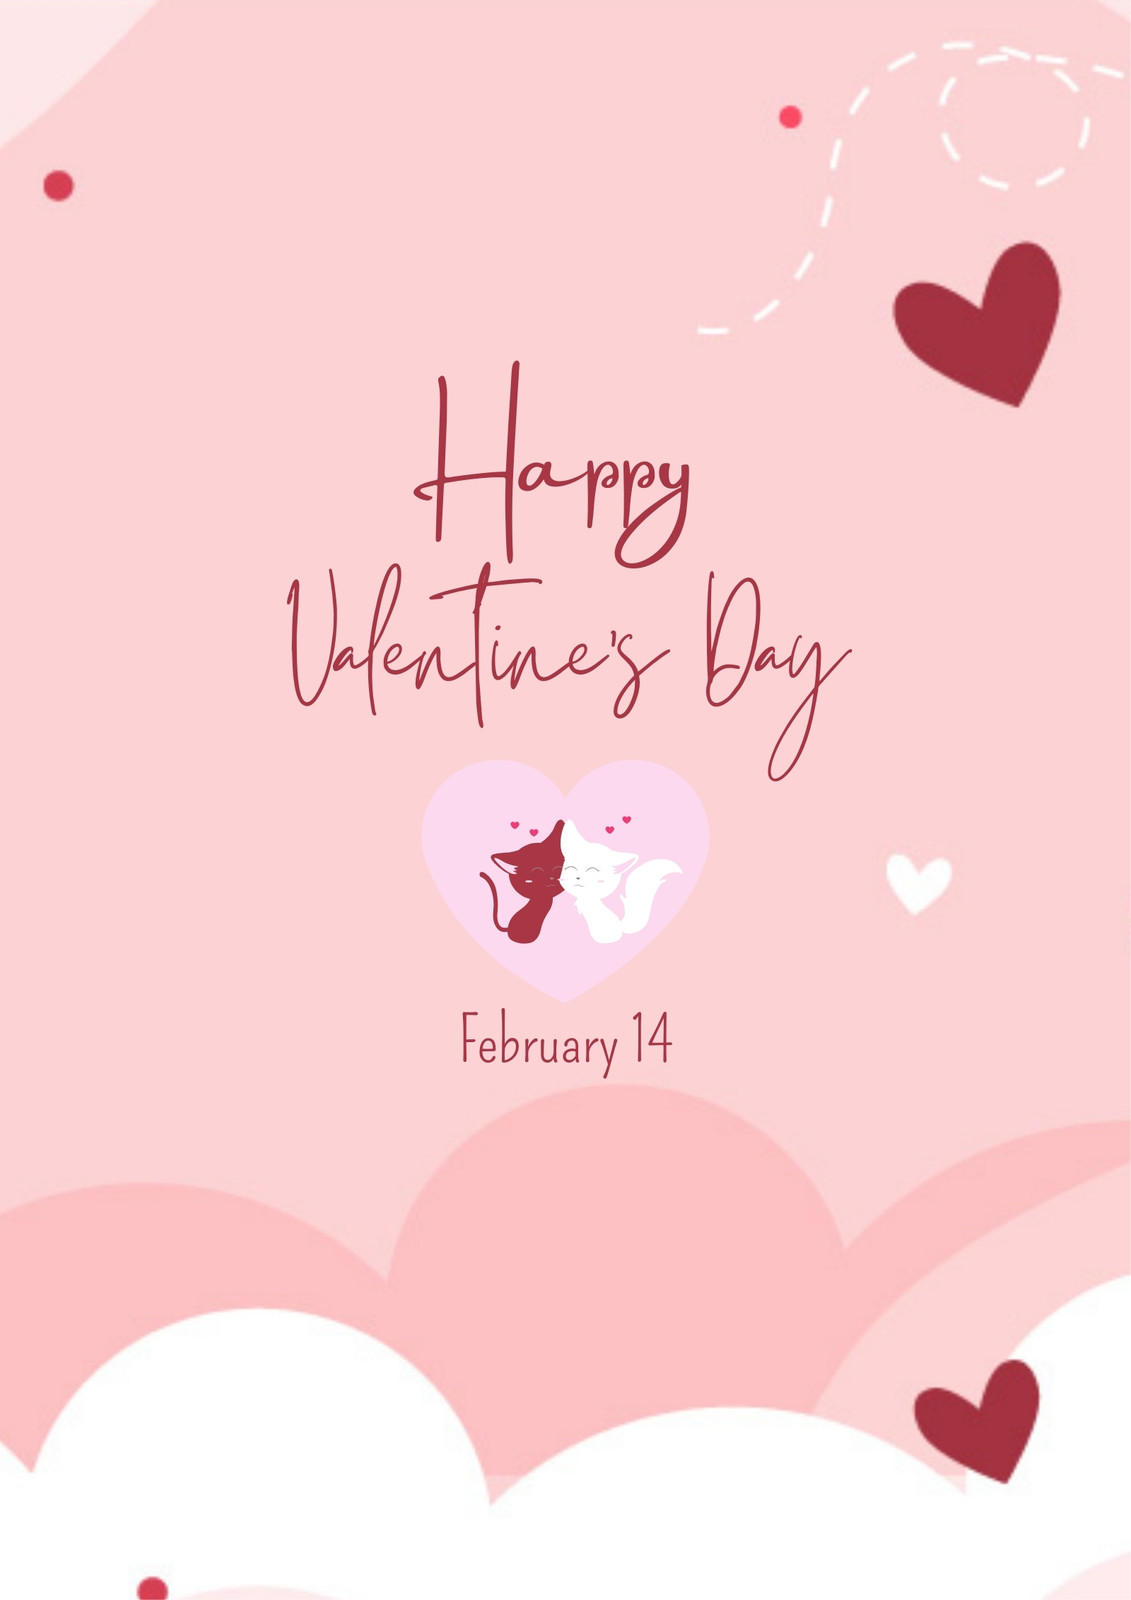 Free and customizable valentines day templates